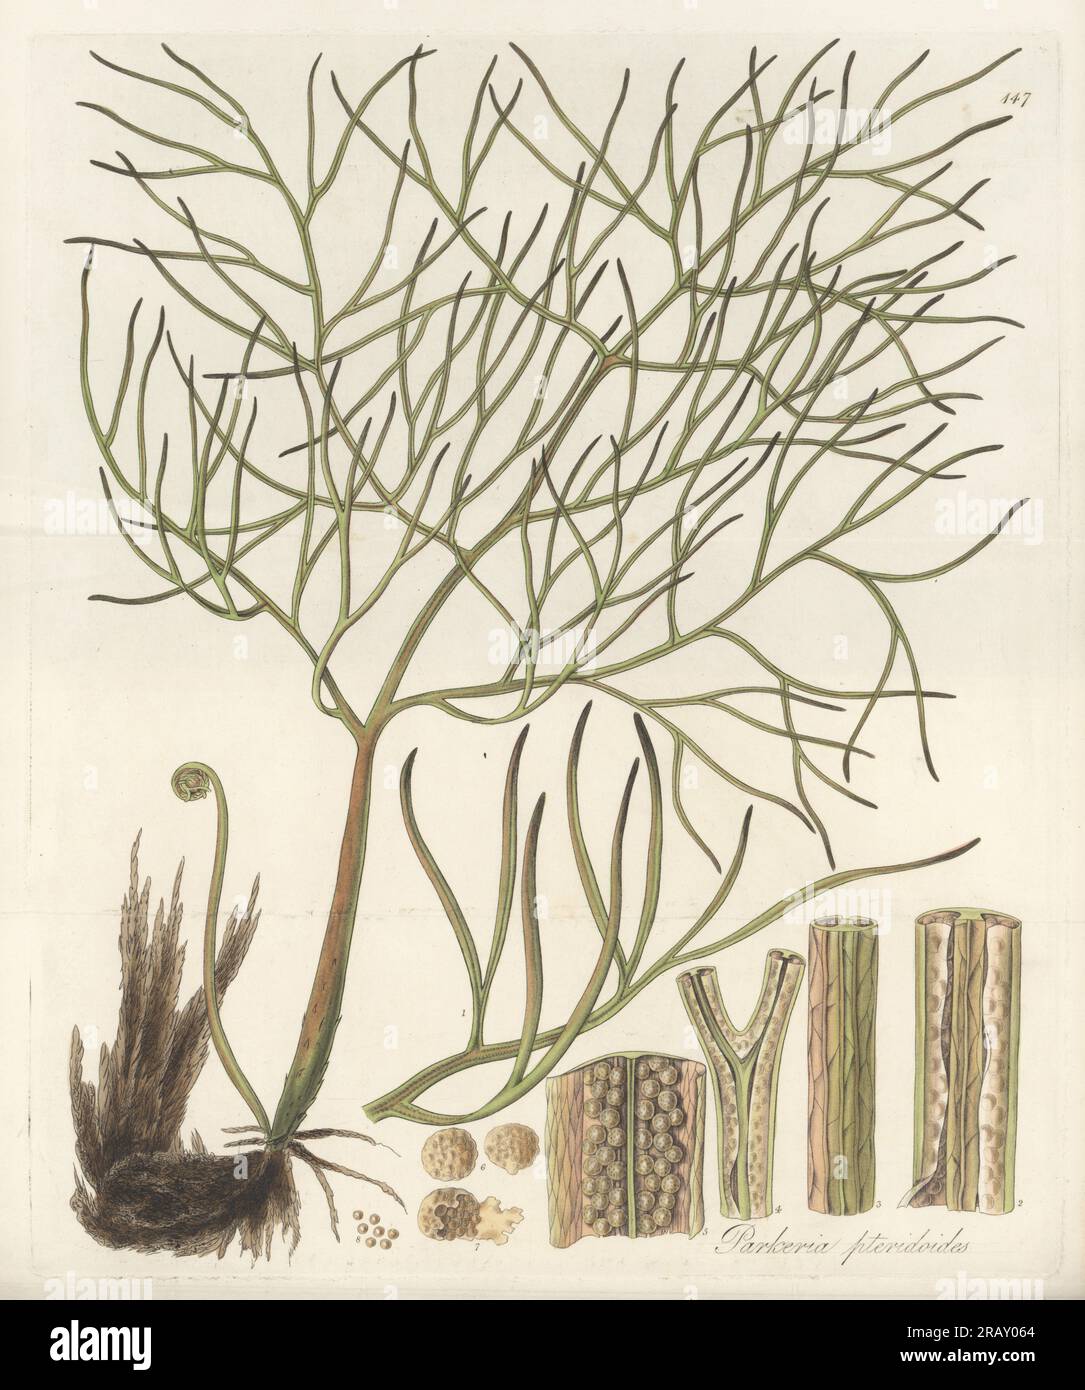 Floating antlerfern, Ceratopteris pteridoides. Aquatic fern found in fresh-water ditches in Essequibo (Dutch colony in Guyana) by C. S. Parker Esq. Pteris-like parkeria, Parkeria pteridoides. Handcoloured copperplate engraving by Joseph Swan after a botanical illustration by William Jackson Hooker from his Exotic Flora, William Blackwood, Edinburgh, 1823-27. Stock Photo